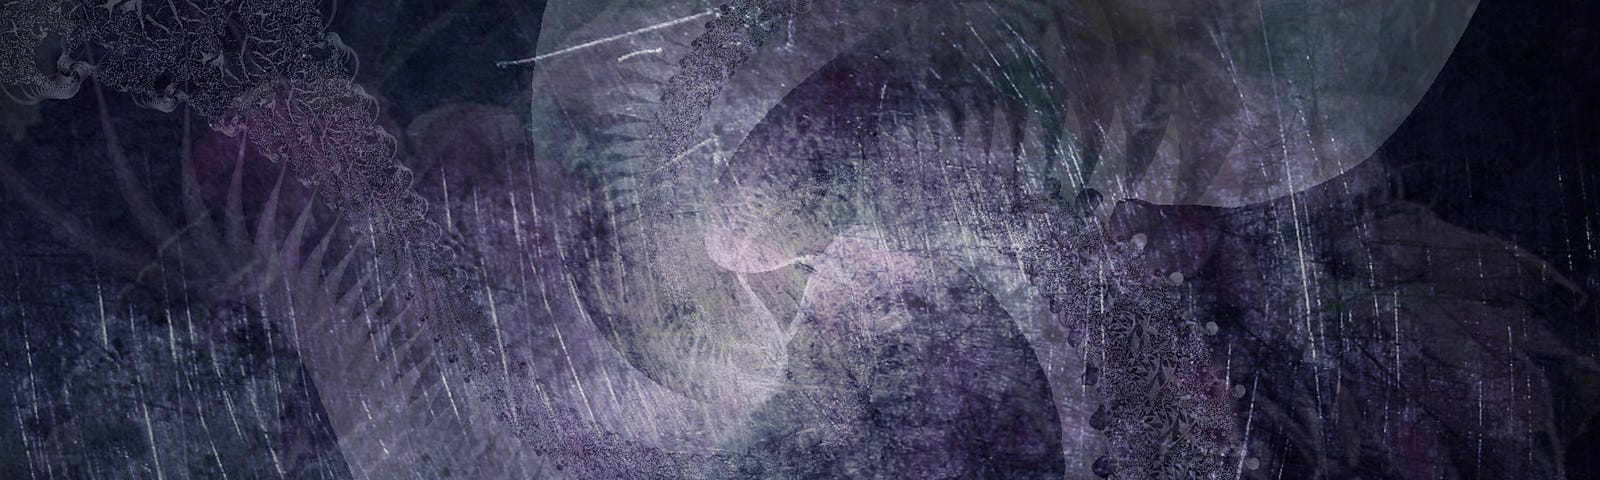 Abstract image of a light swirl on a textured field of black and dark purple.